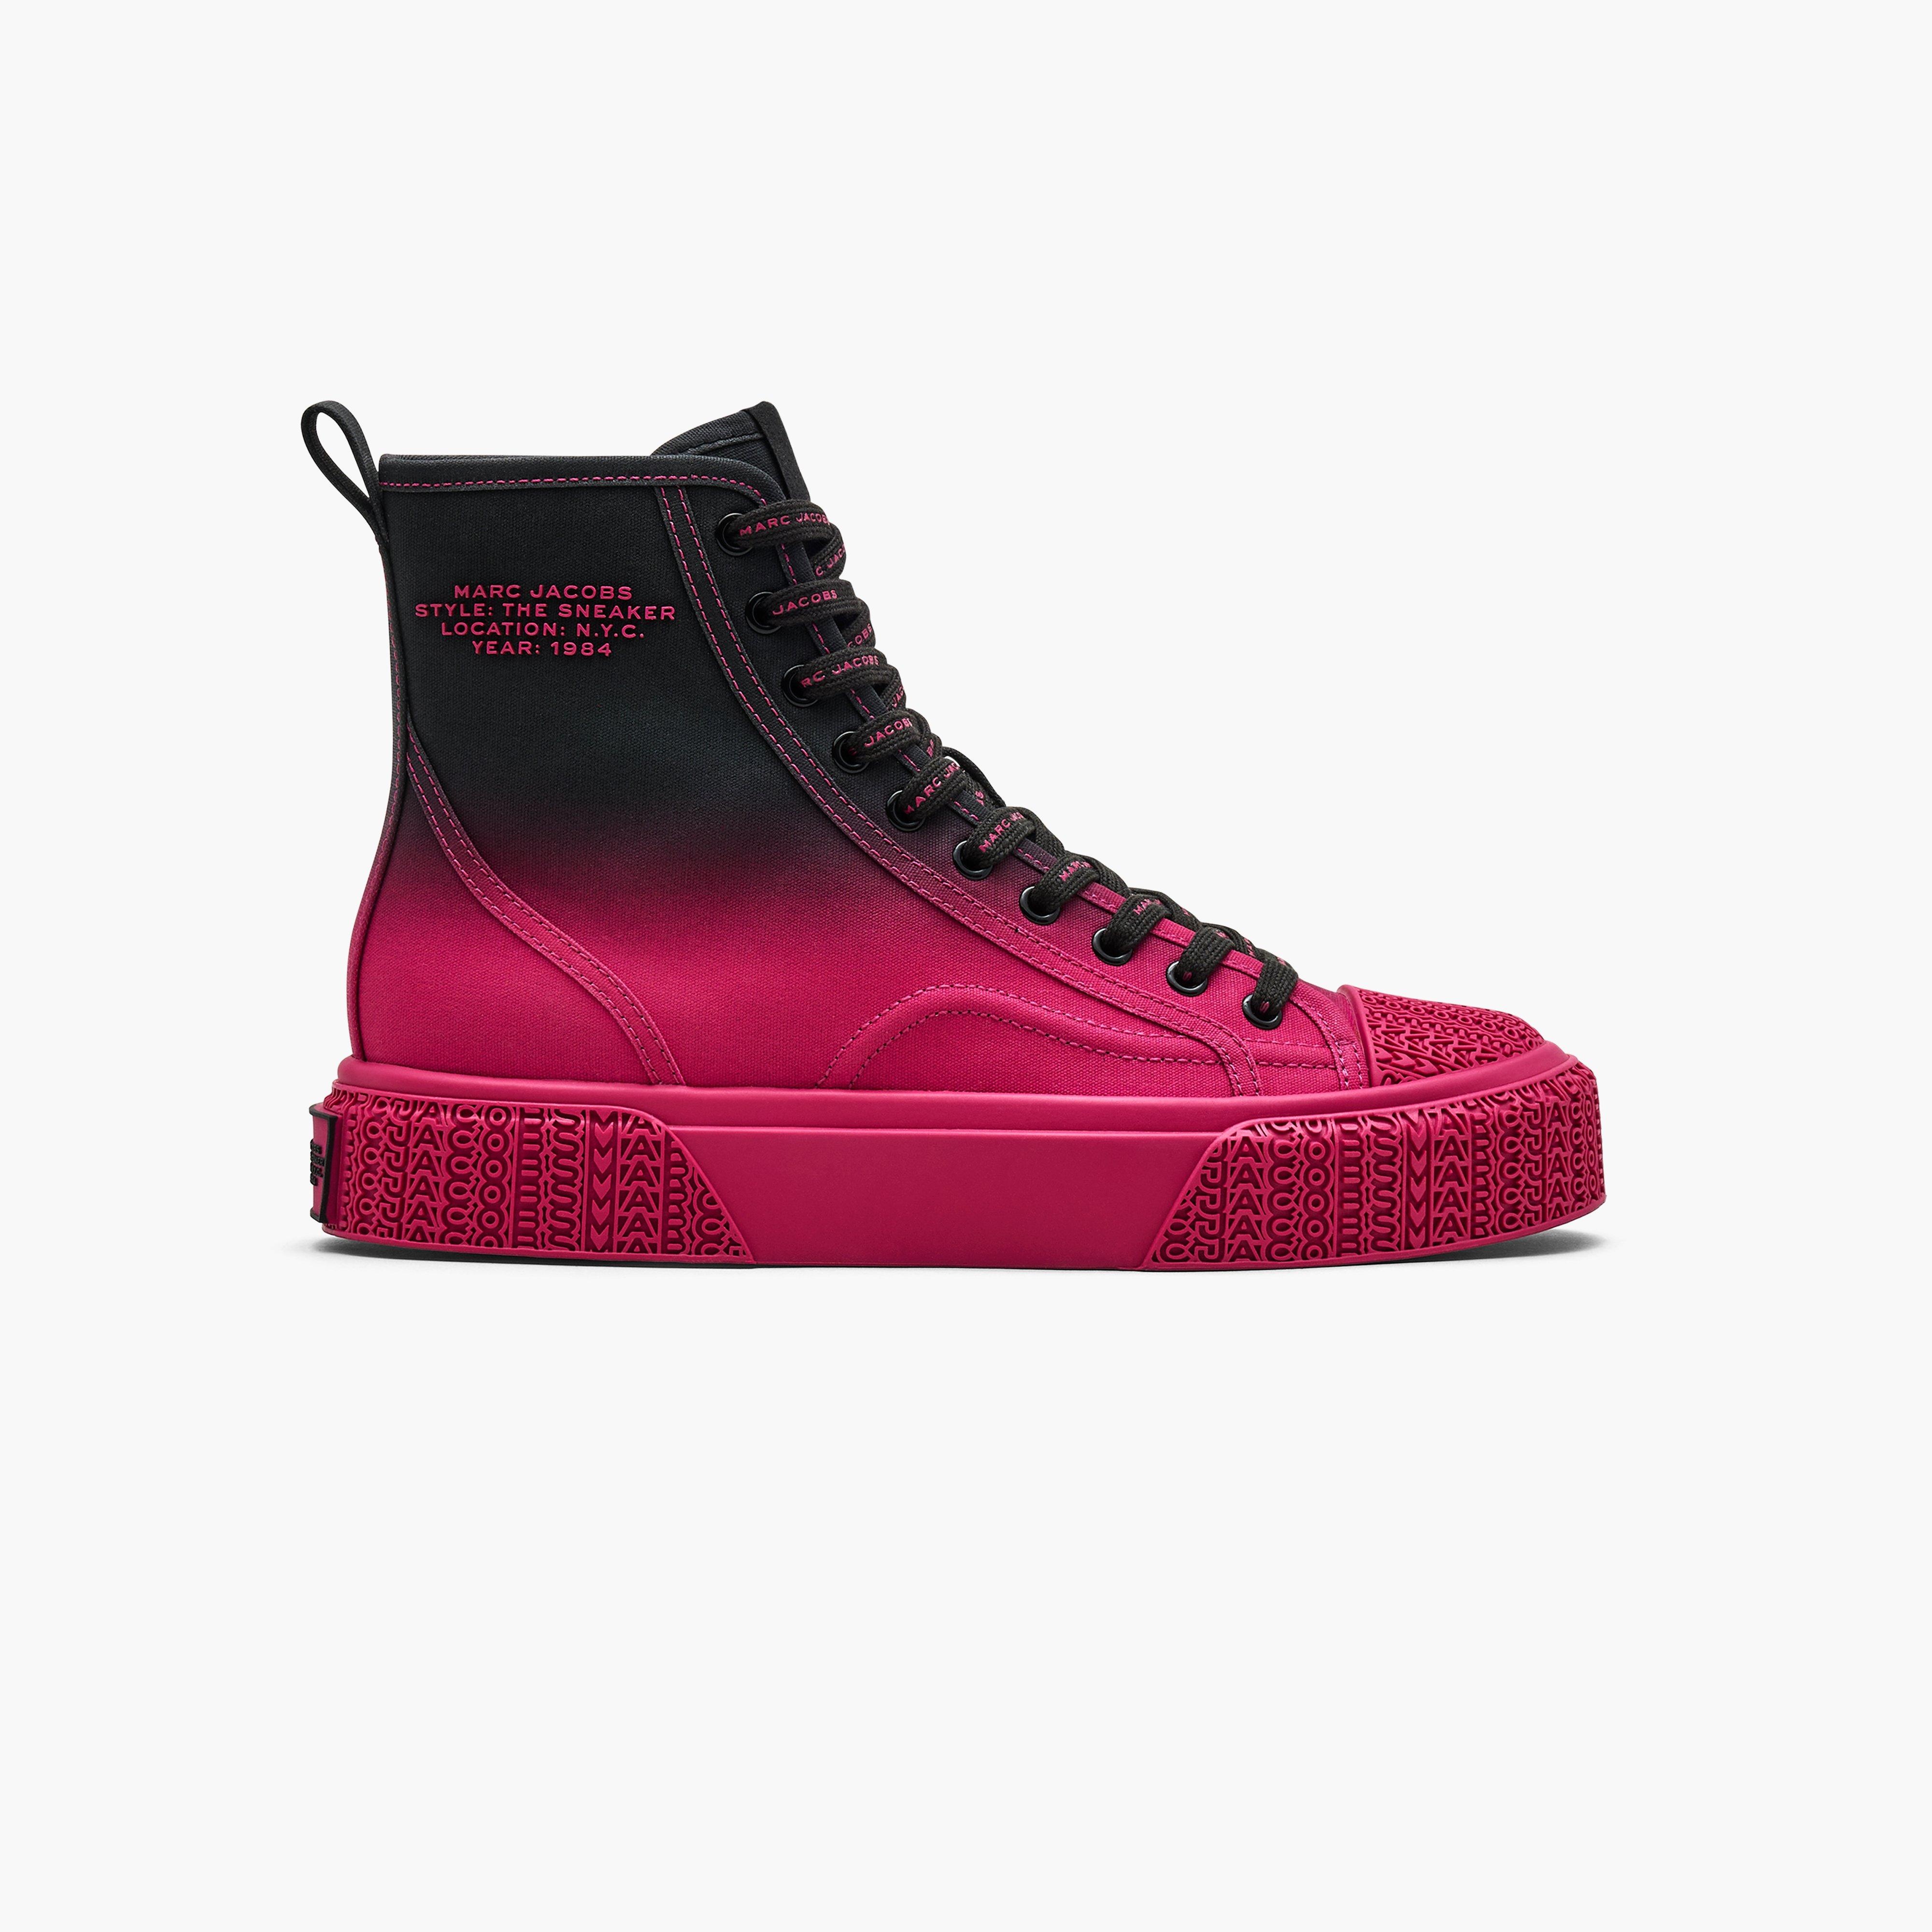 THE OMBRE HIGH TOP SNEAKER - 3